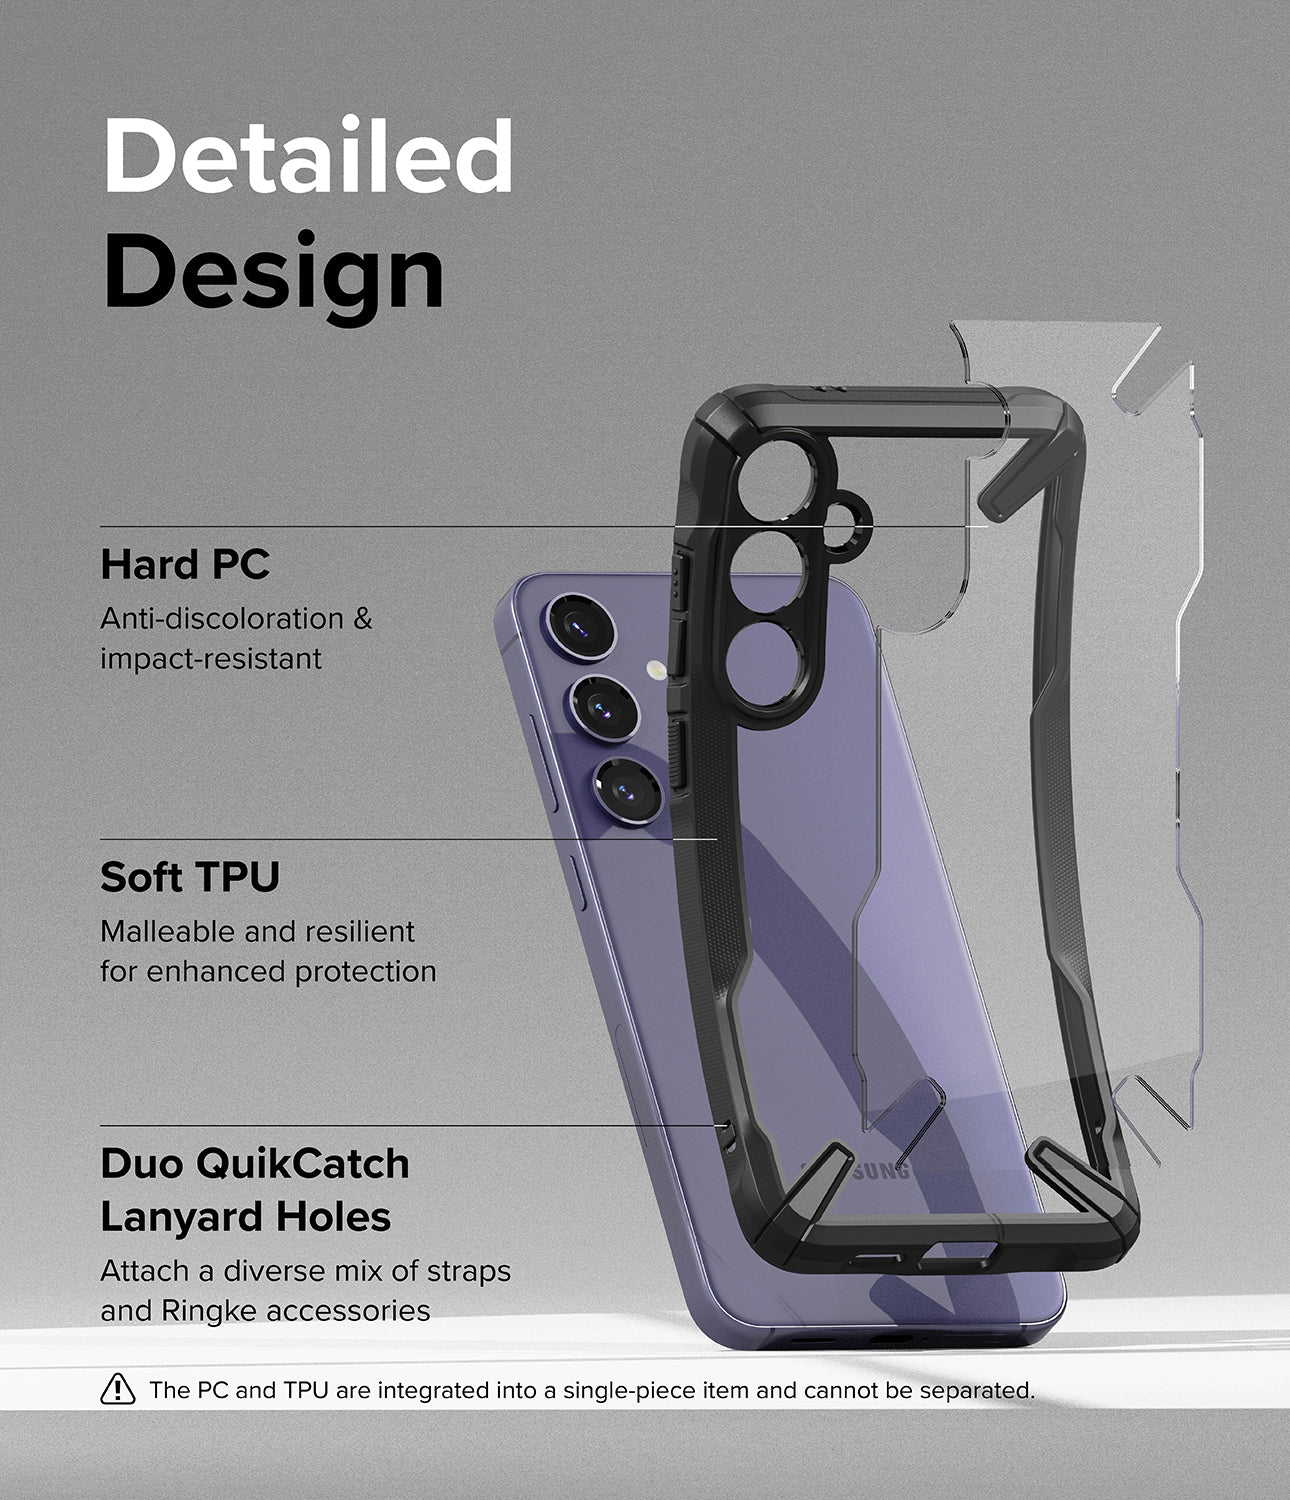 Galaxy S24 Plus Case | Fusion Magnetic - Black - Detailed Design. Anti-discoloration with Hard PC. Malleable and resilient for enhanced protection with Soft TPU. Attach a diverse mix of straps and Ringke accessories with Duo QuikCatch Lanyard Holes.